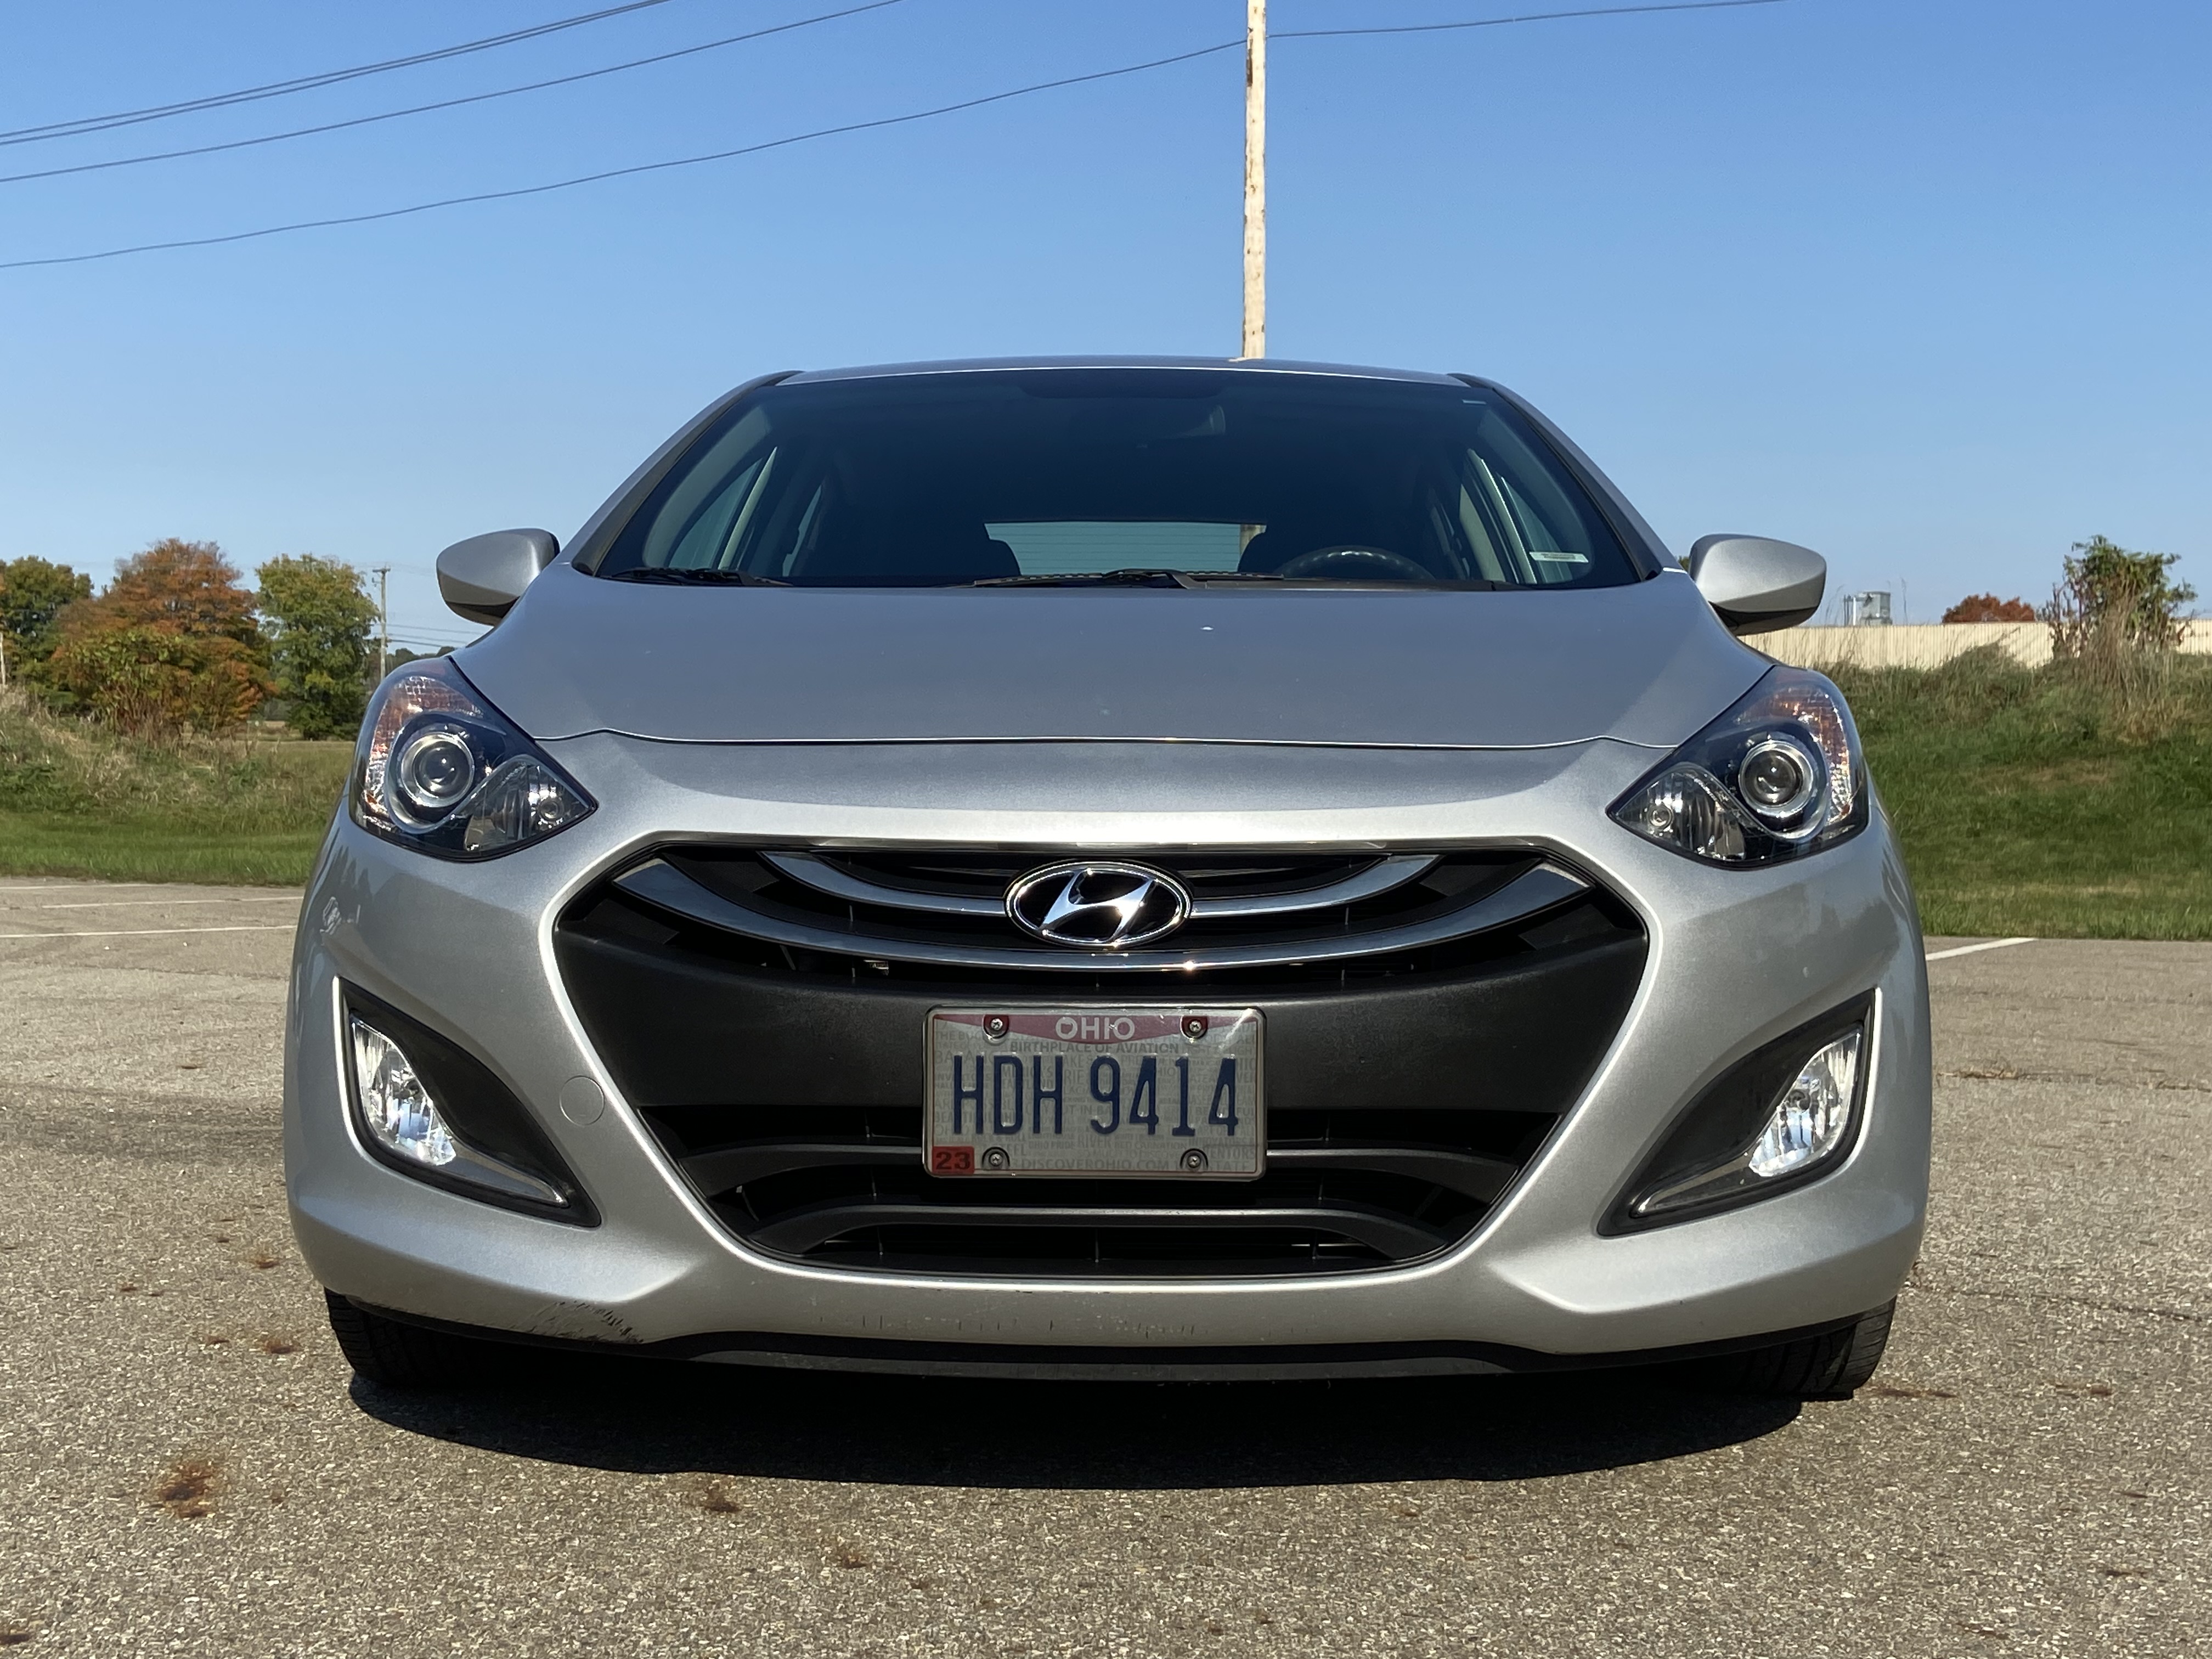 2015 Hyundai Accent vs. 2015 Hyundai Elantra: What's the Difference? -  Autotrader